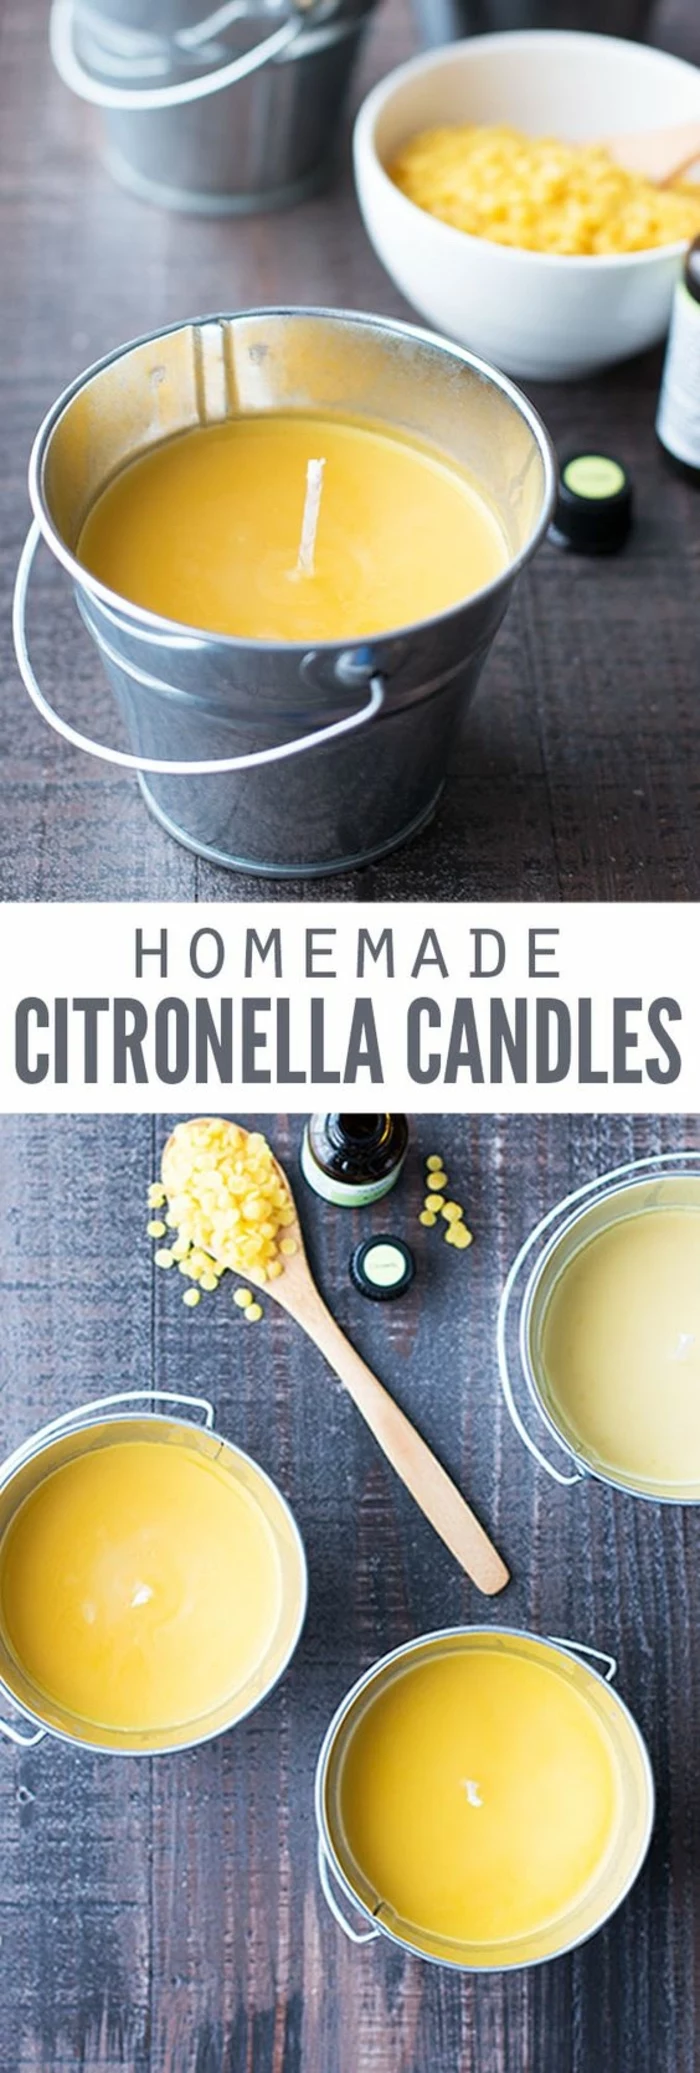 homemade citronella candles, how to make your own candles, yellow candle wax, inside a small bucket